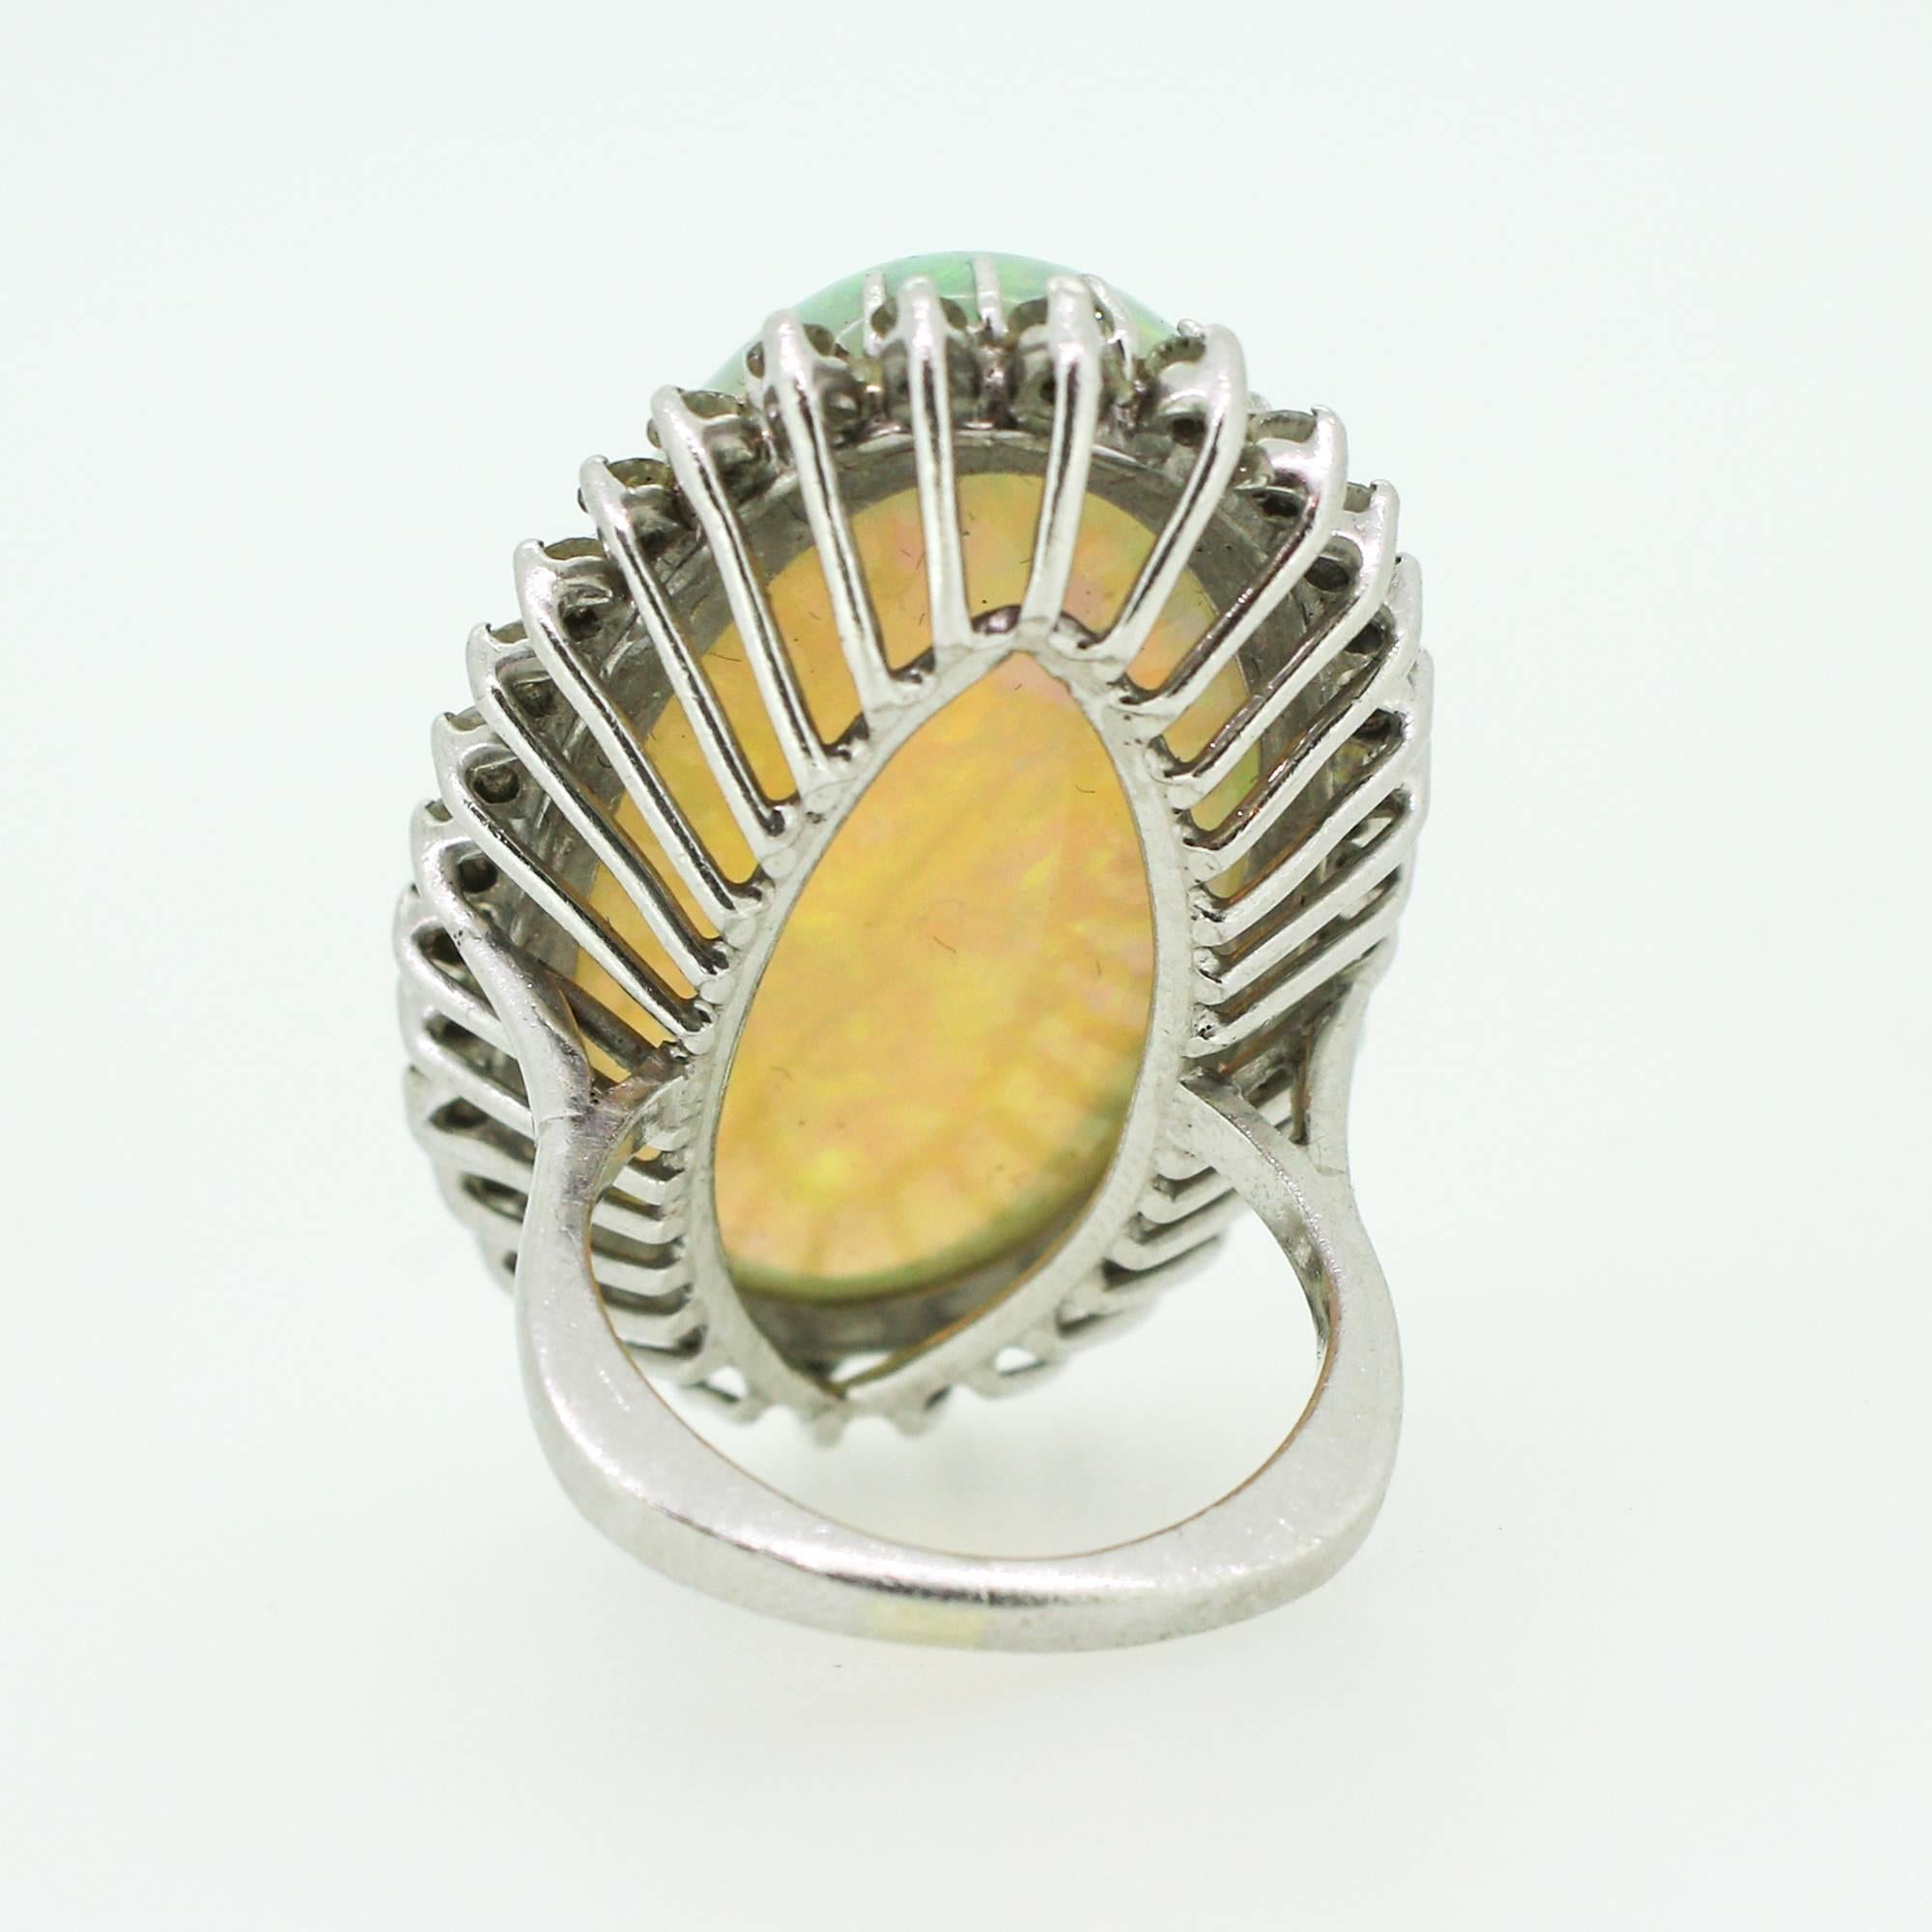 1960s-70s Modernist 47.05 Carat Cabochon Opal Ring with Diamond Halo 3